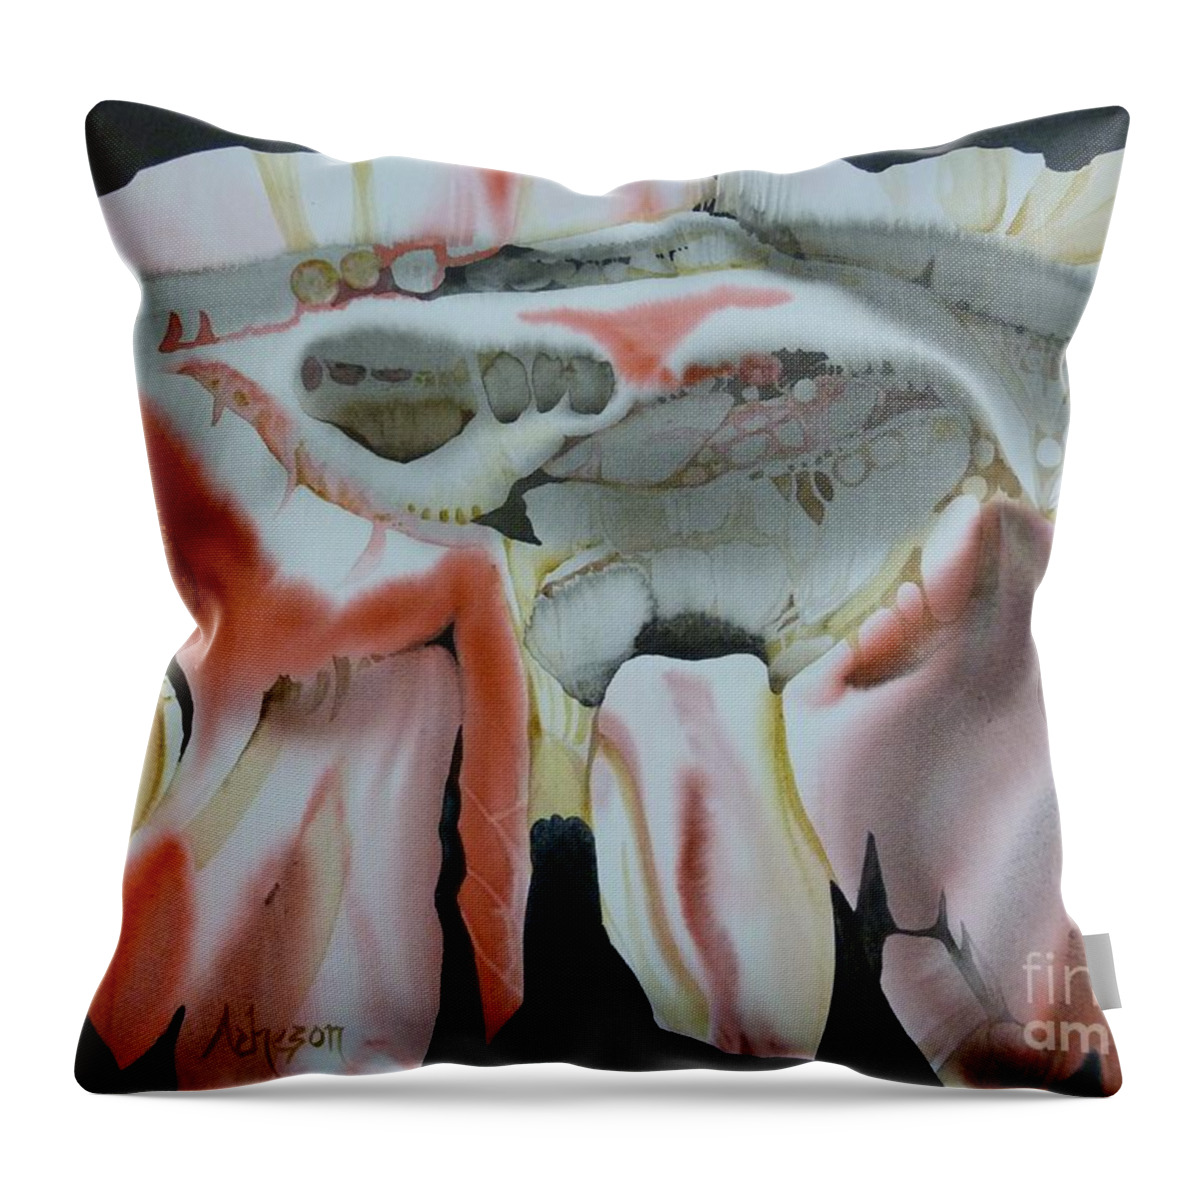 Watercolour Throw Pillow featuring the painting Kommodo #1 by Donna Acheson-Juillet